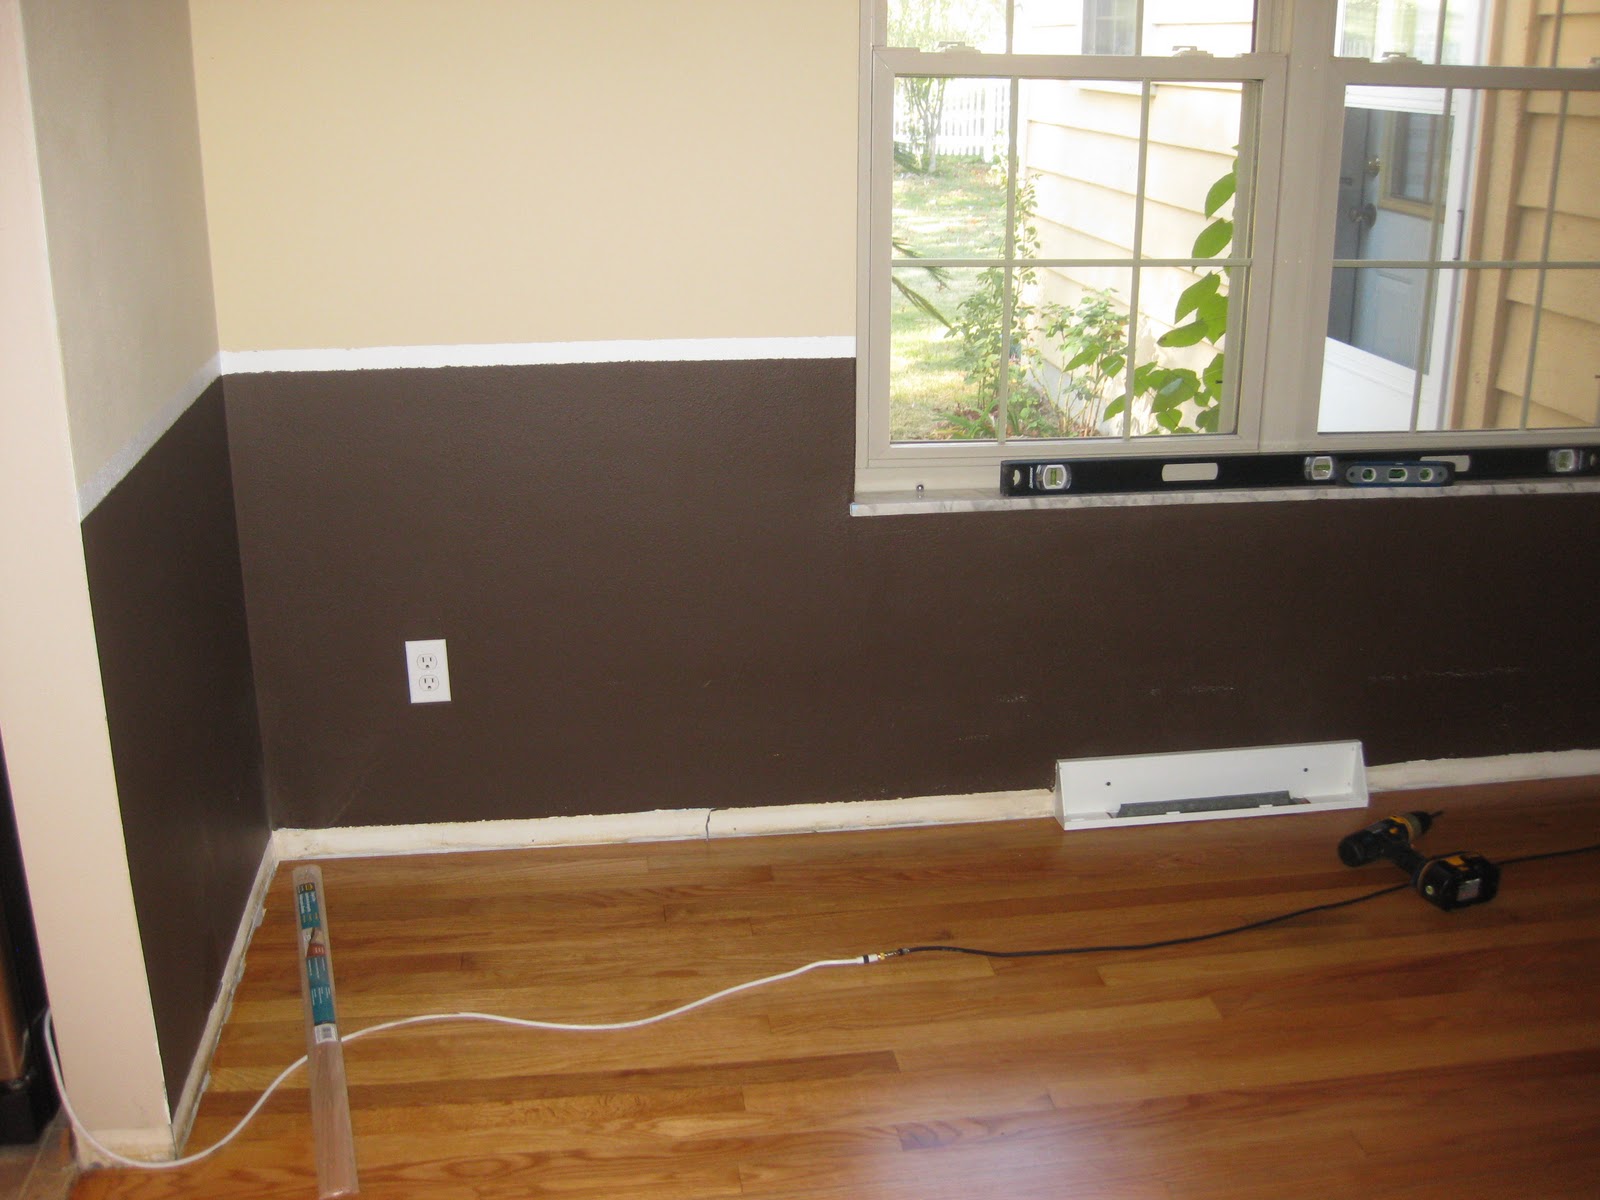 New and ...Improving?: Chair Rail and Floor Trim in the ...